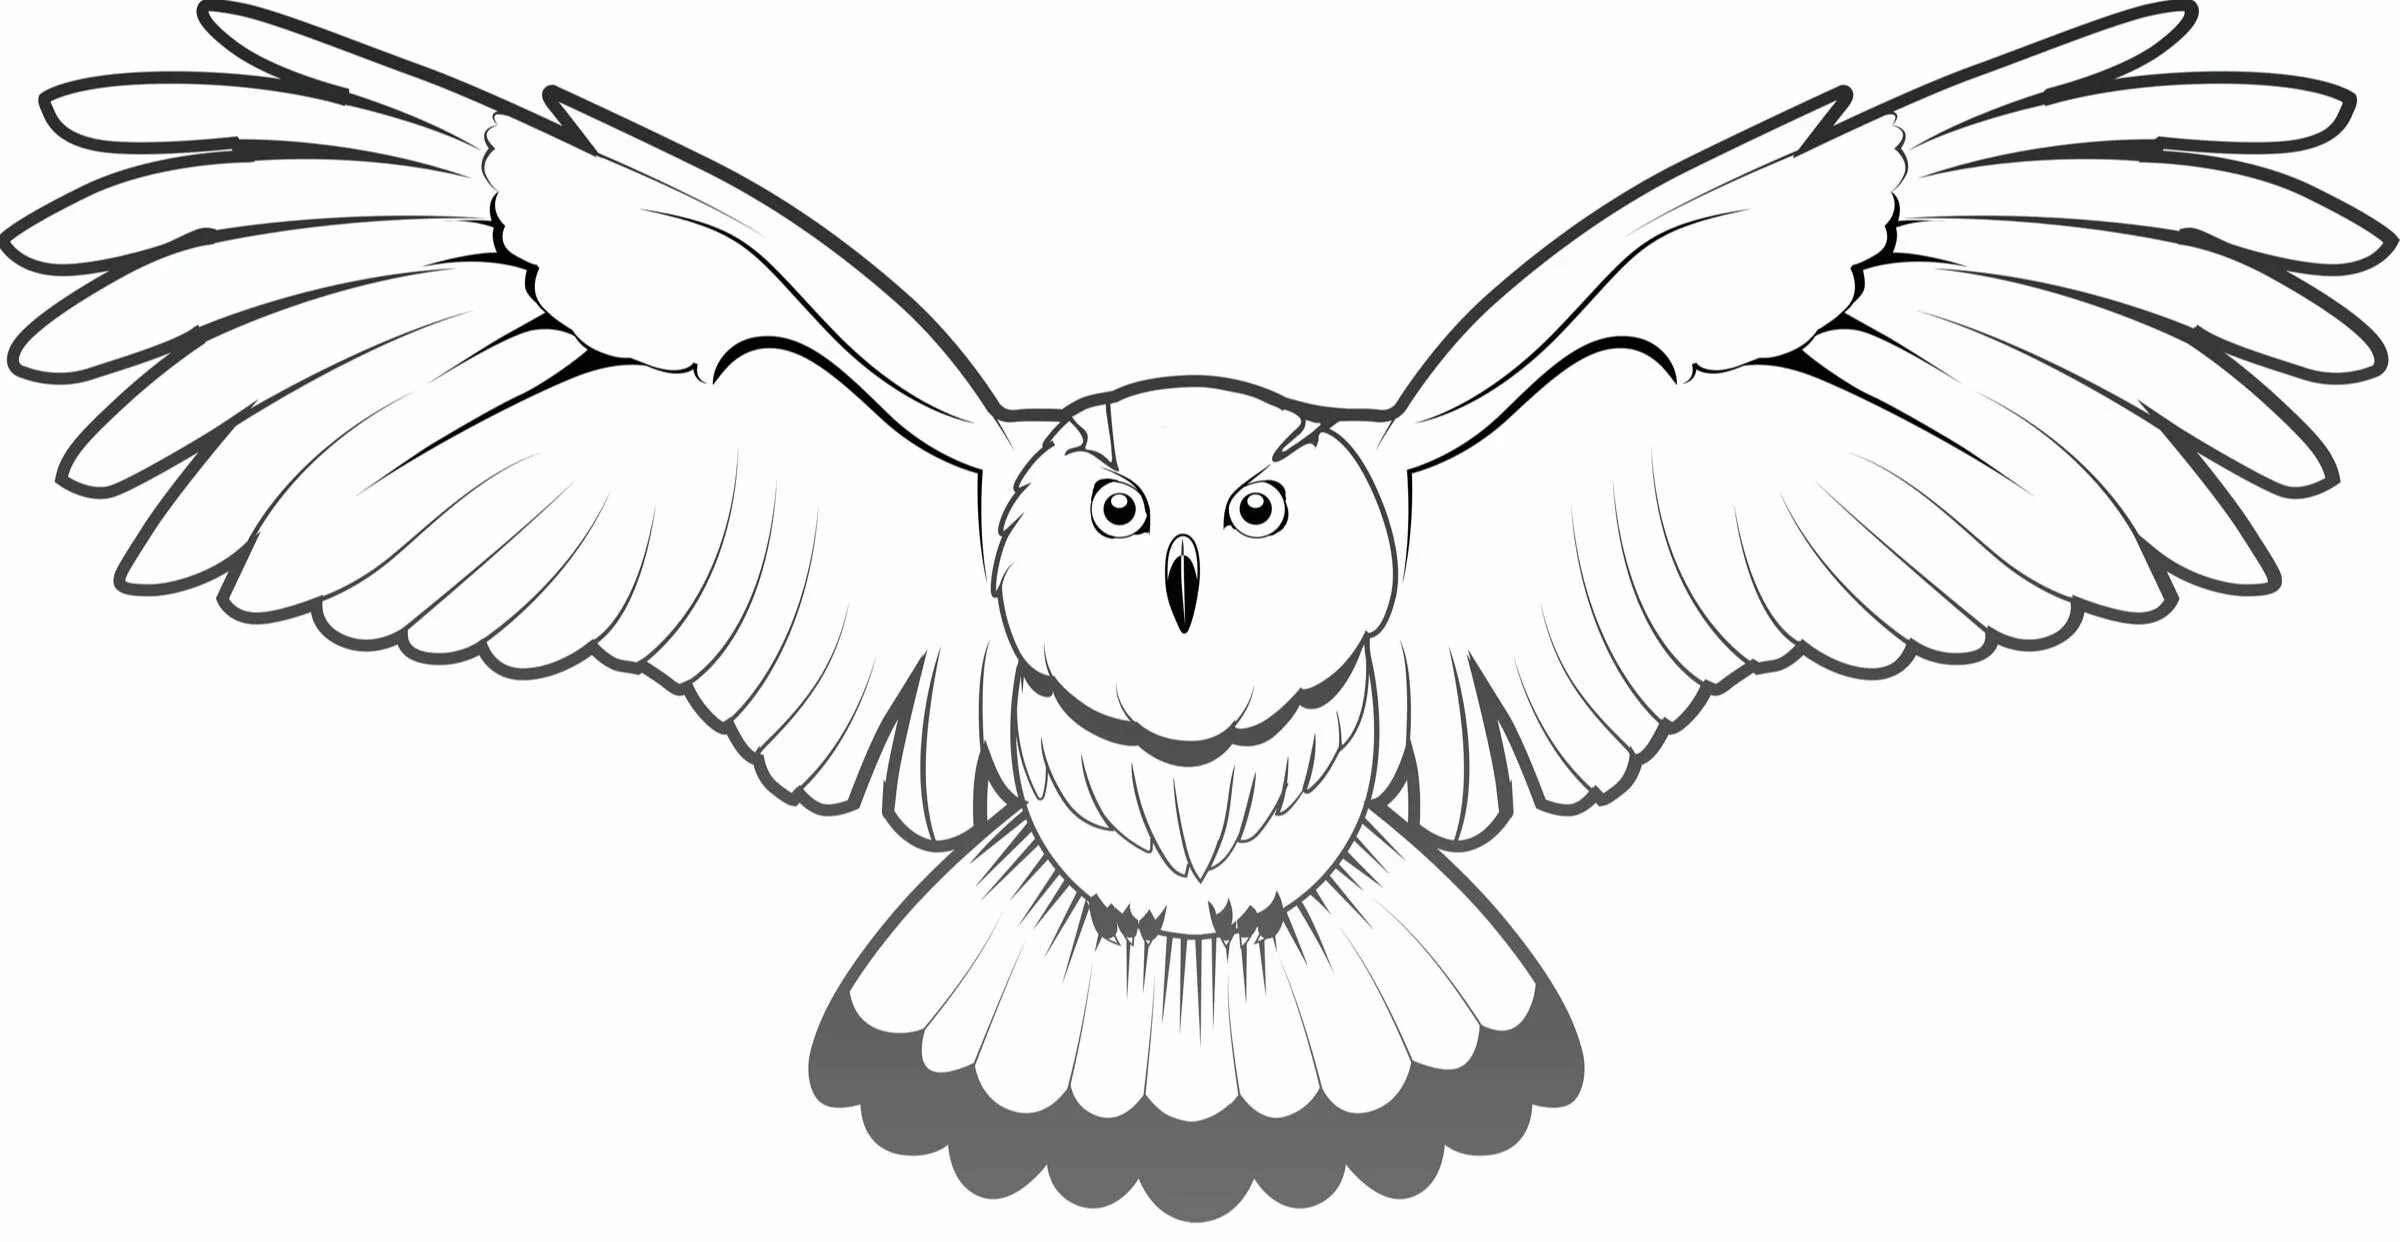 Witty snowy owl coloring book for beginners